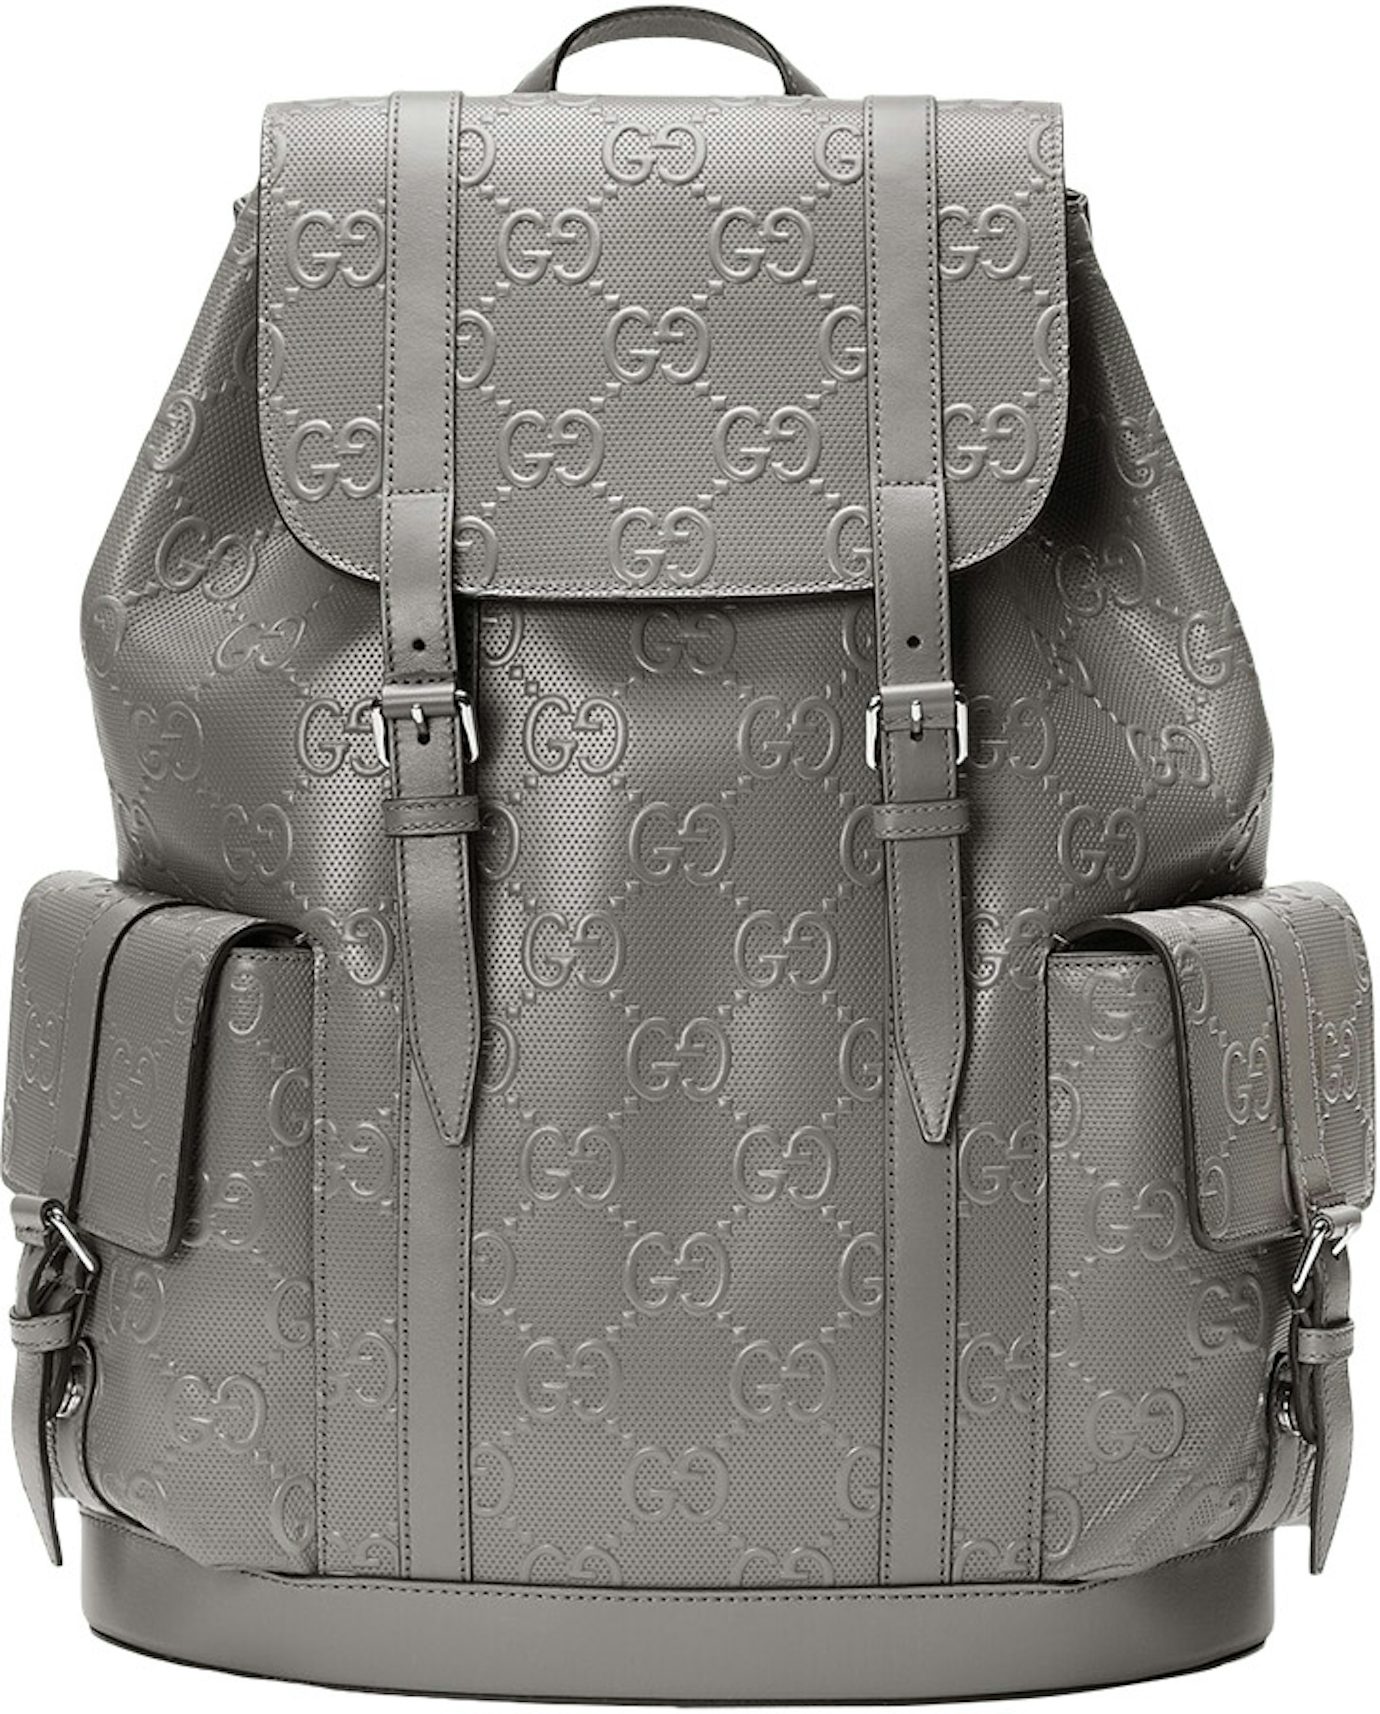 Gucci GG Embossed Backpack, Black, 625770 -USED- ST168